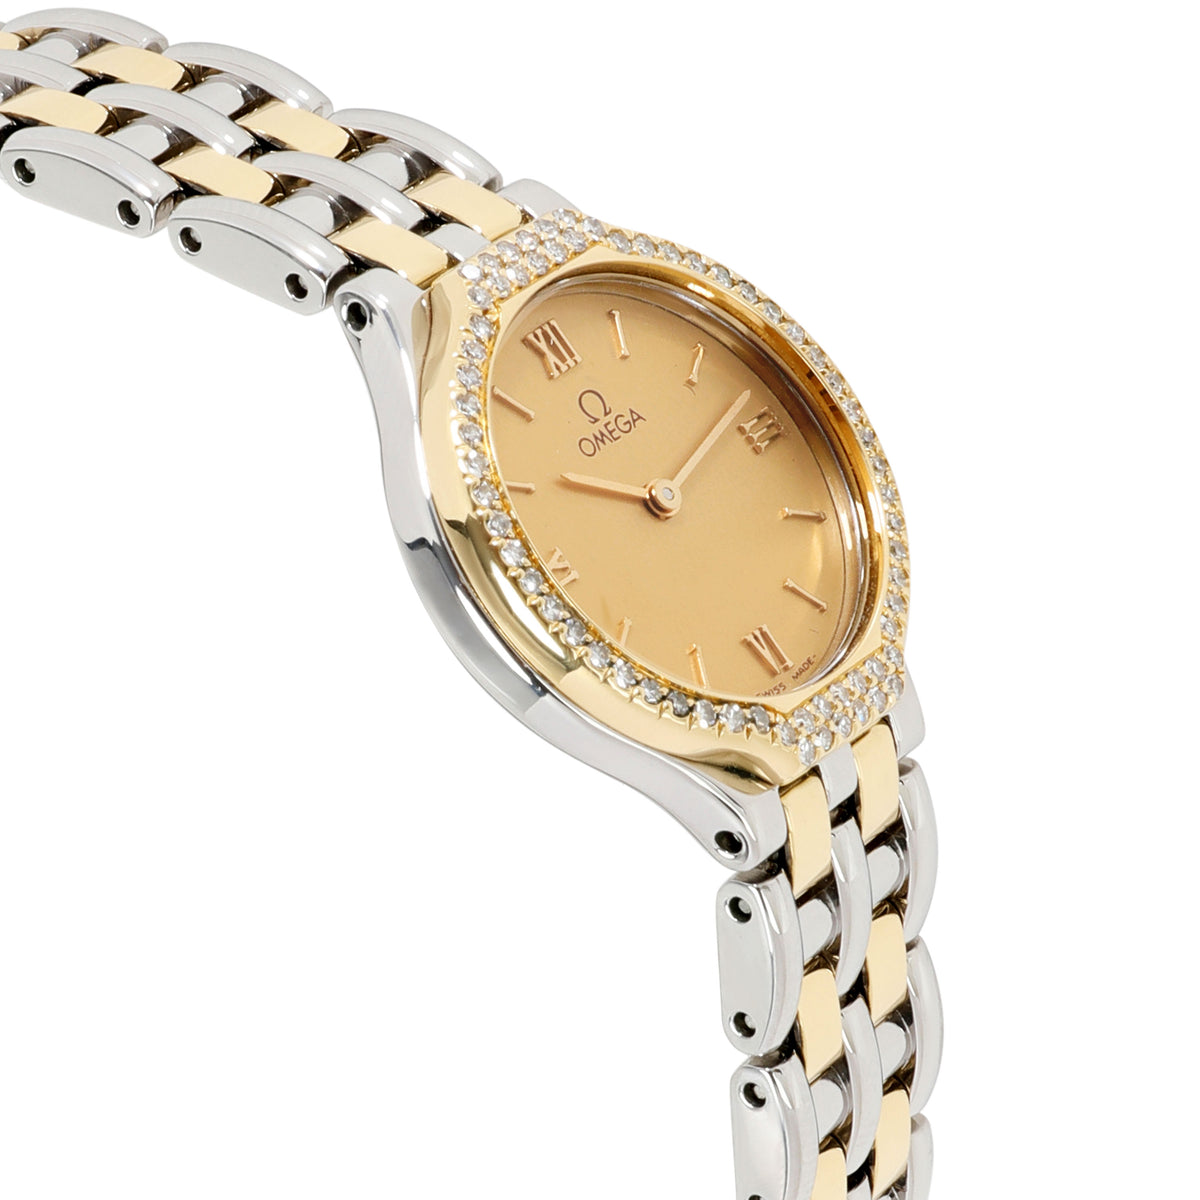 Omega DeVille 4265.13.00 Women's Watch in 18kt Stainless Steel/Yellow Gold